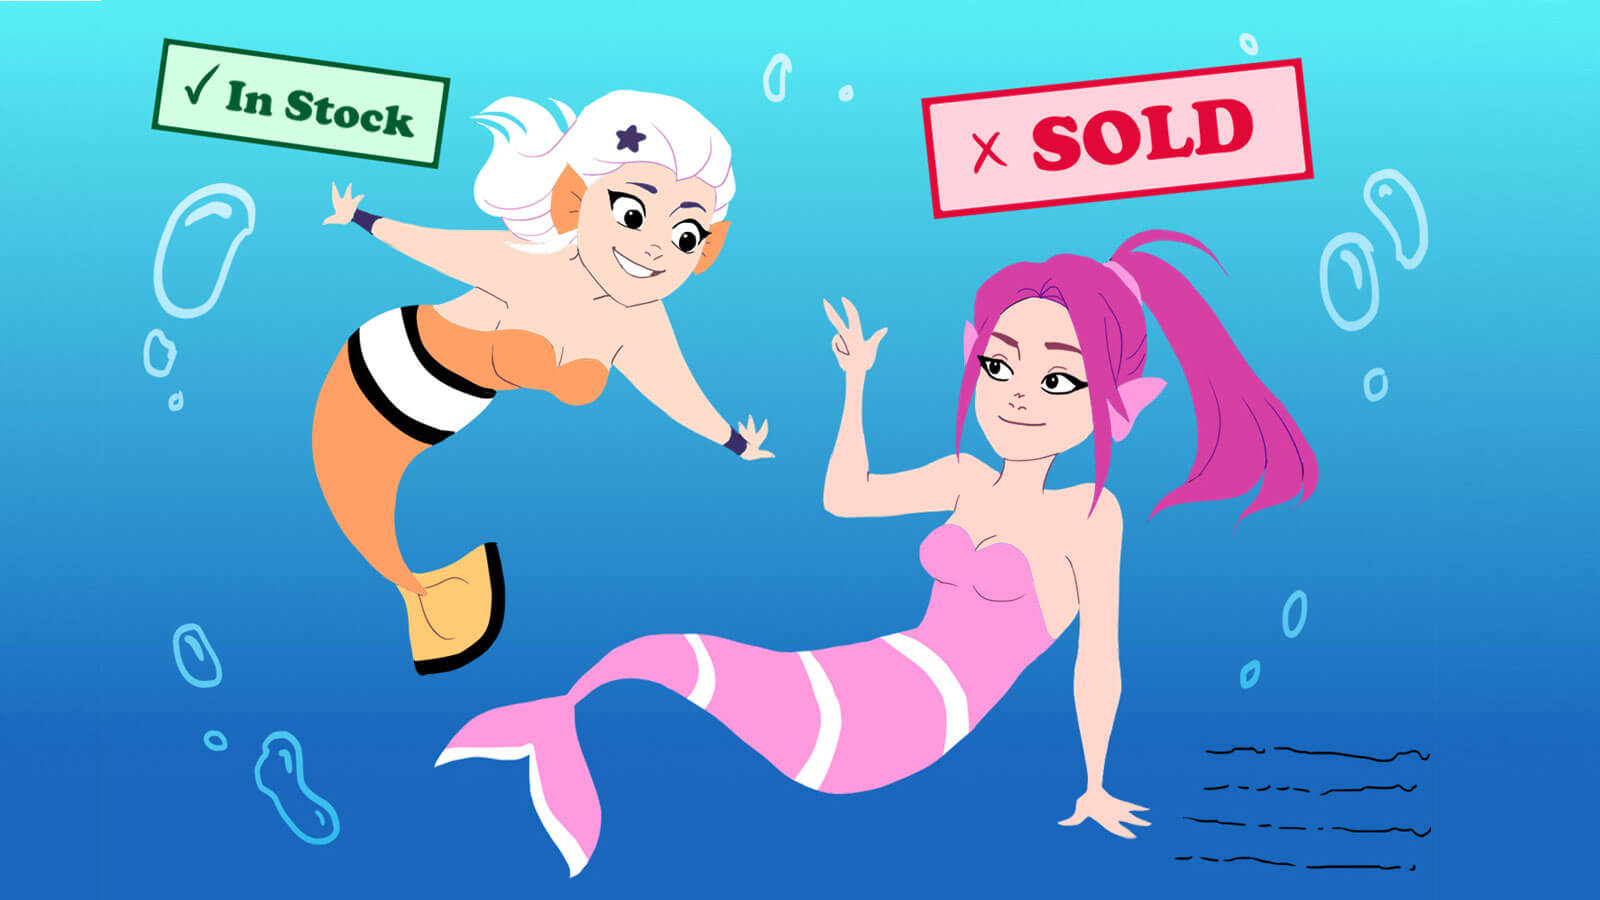 Two mermaids, one marked as "in stock" and the other as "sold"